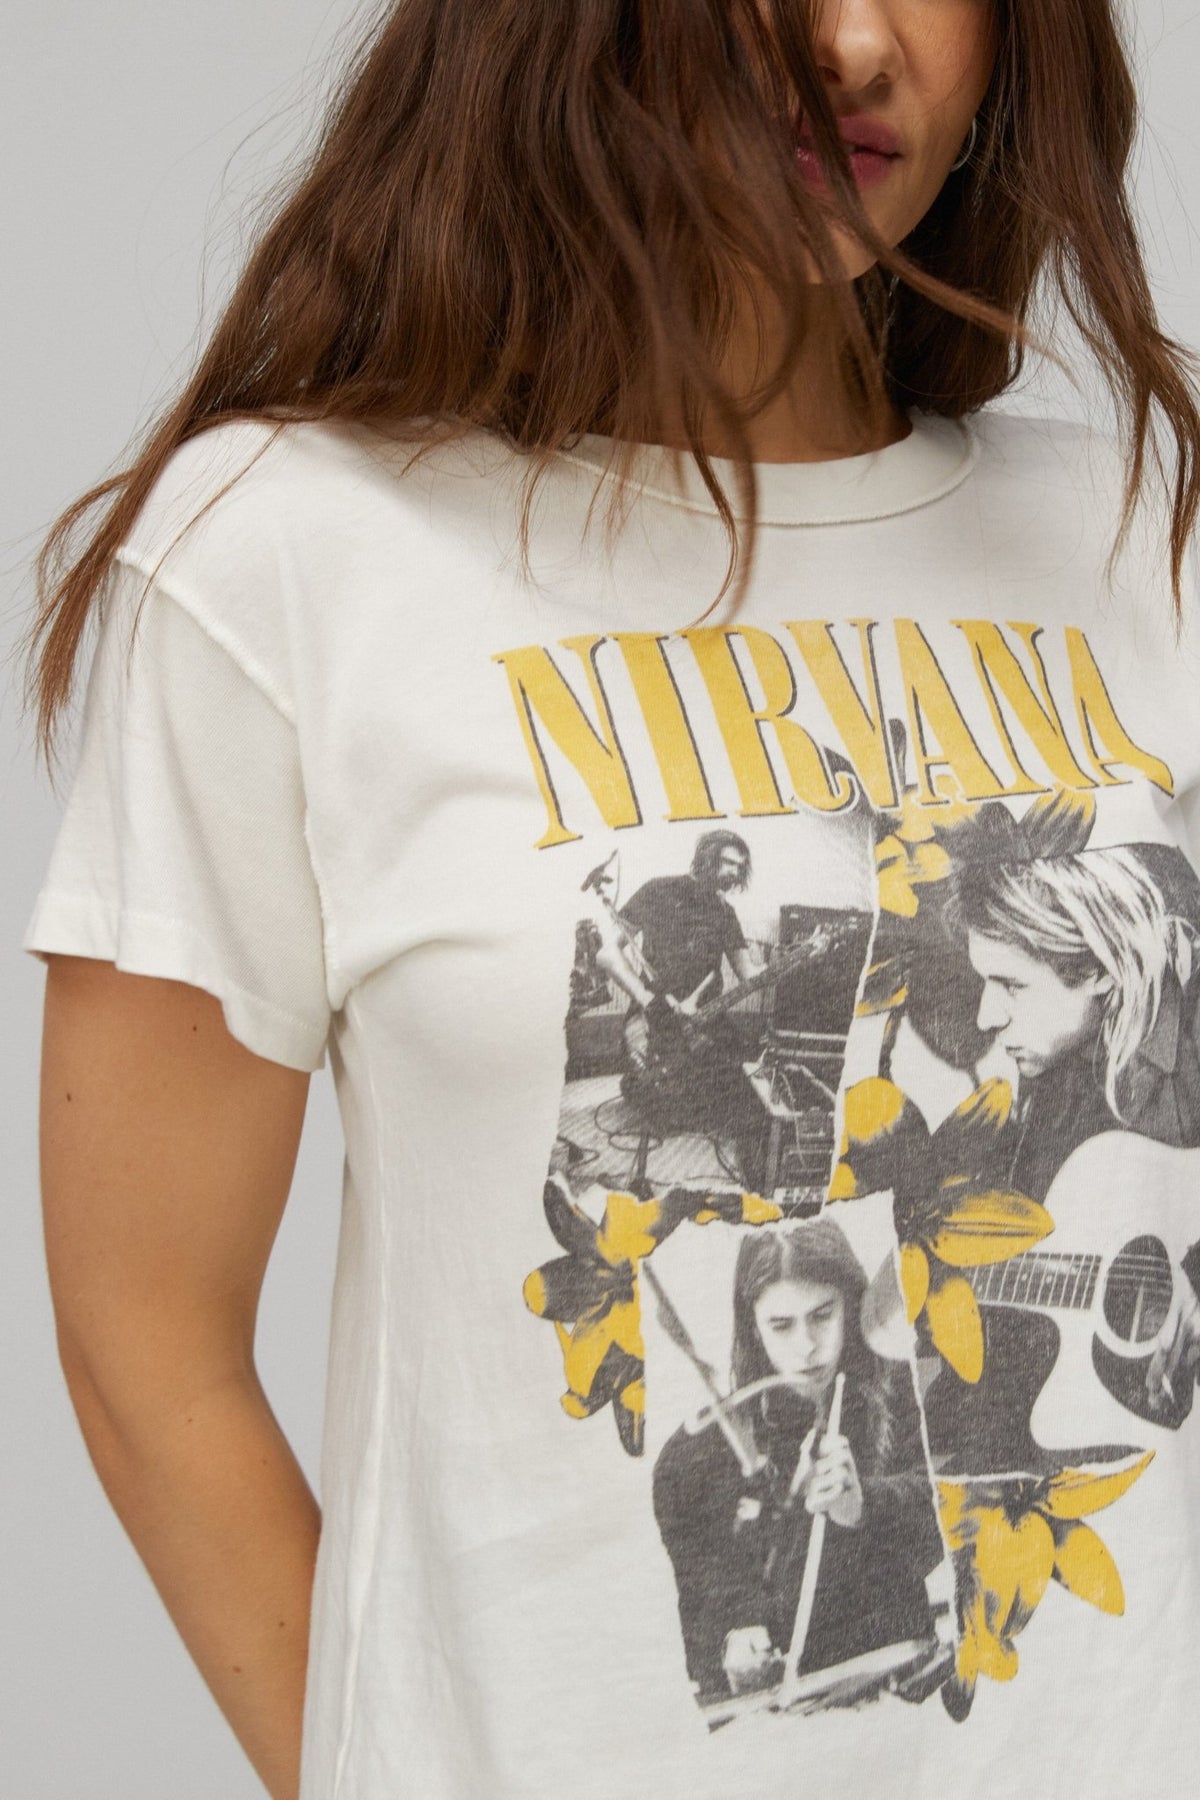 DAYDREAMER Nirvana Collage Reverse Girlfriend Tee in Vintage White - Graphic Tee - Blooming Daily